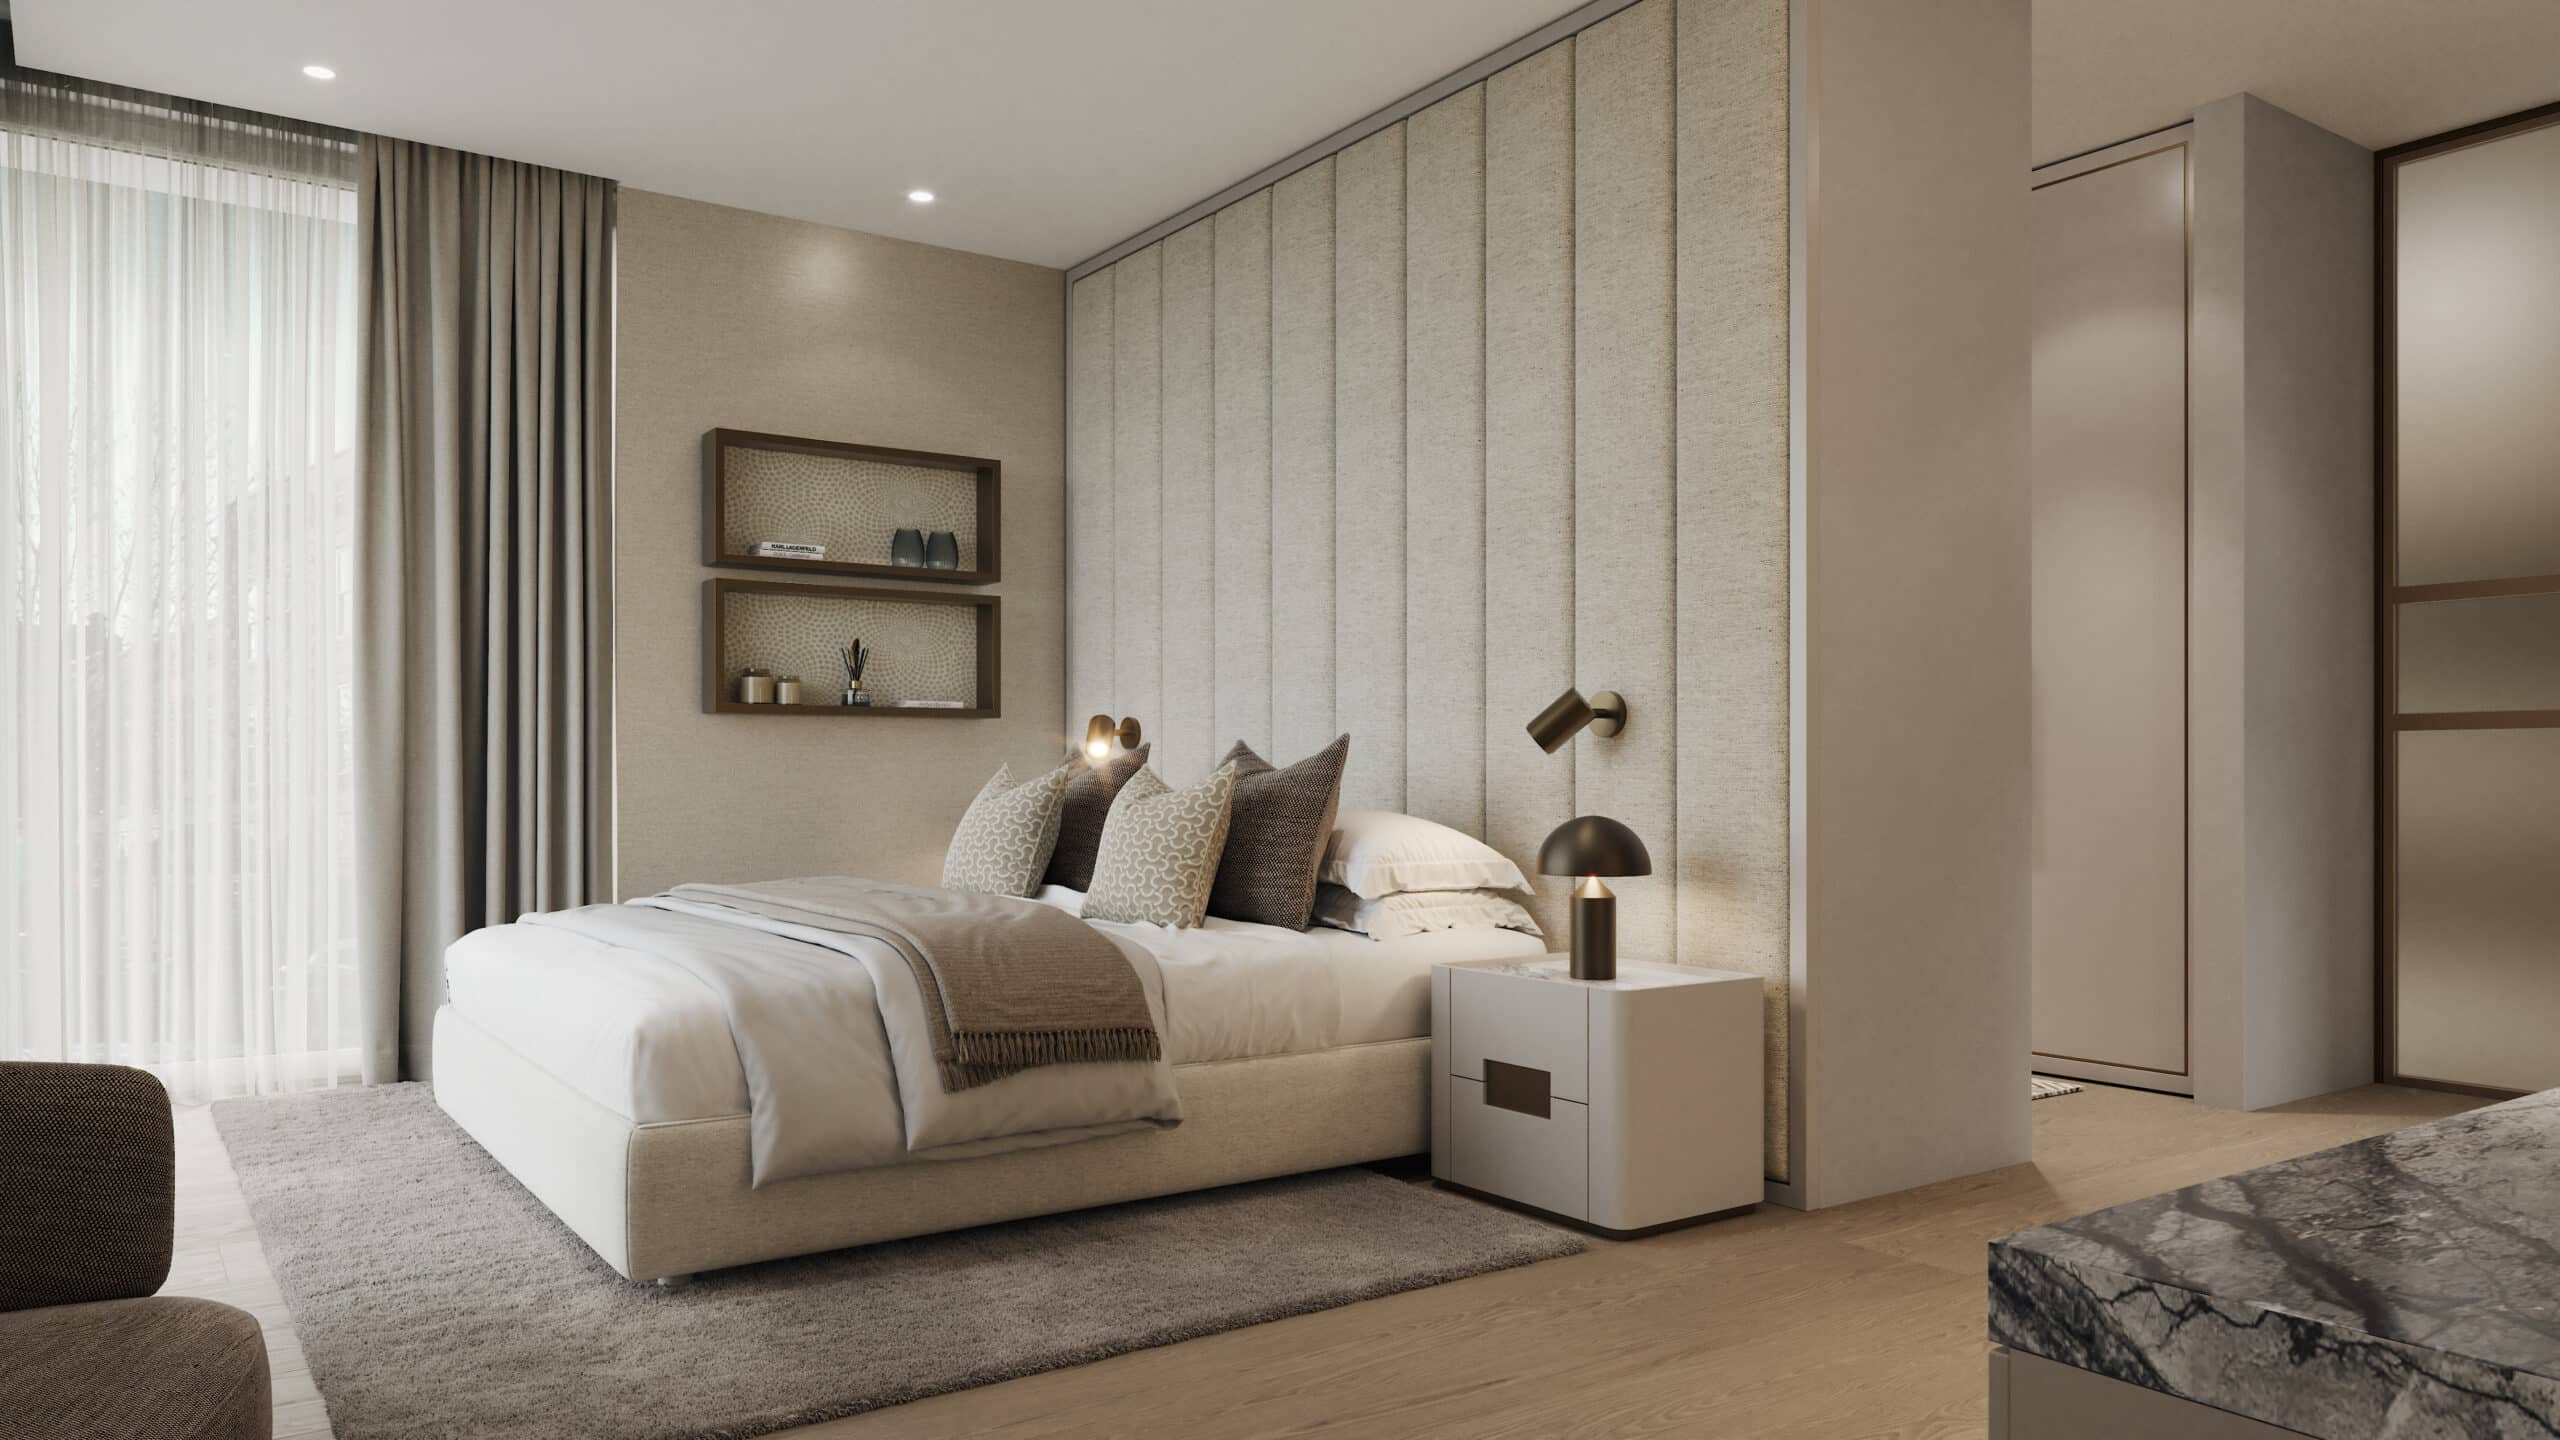 Luxurious bedroom by Dami